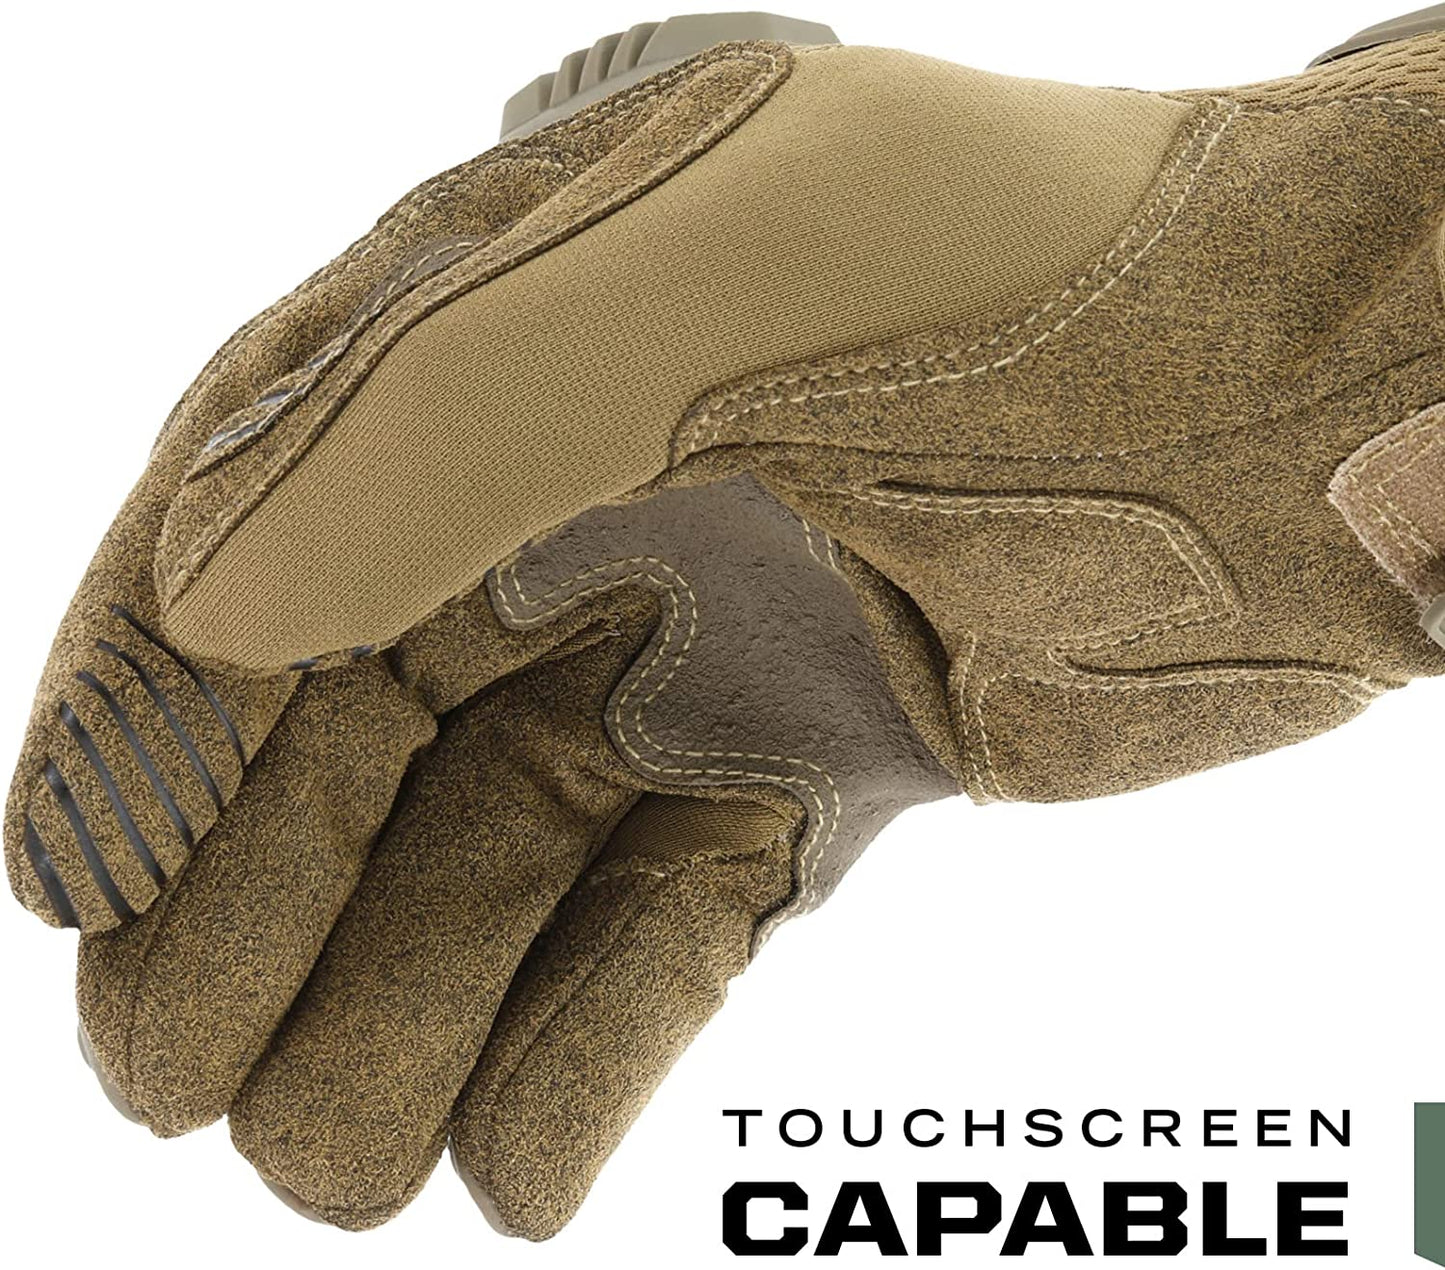 M-Pact Tactical Gloves with Secure Fit, Touchscreen Capable Safety Gloves for Men, Work Gloves with Impact Protection and Vibration Absorption (Brown, XX-Large) Mechanix Wear